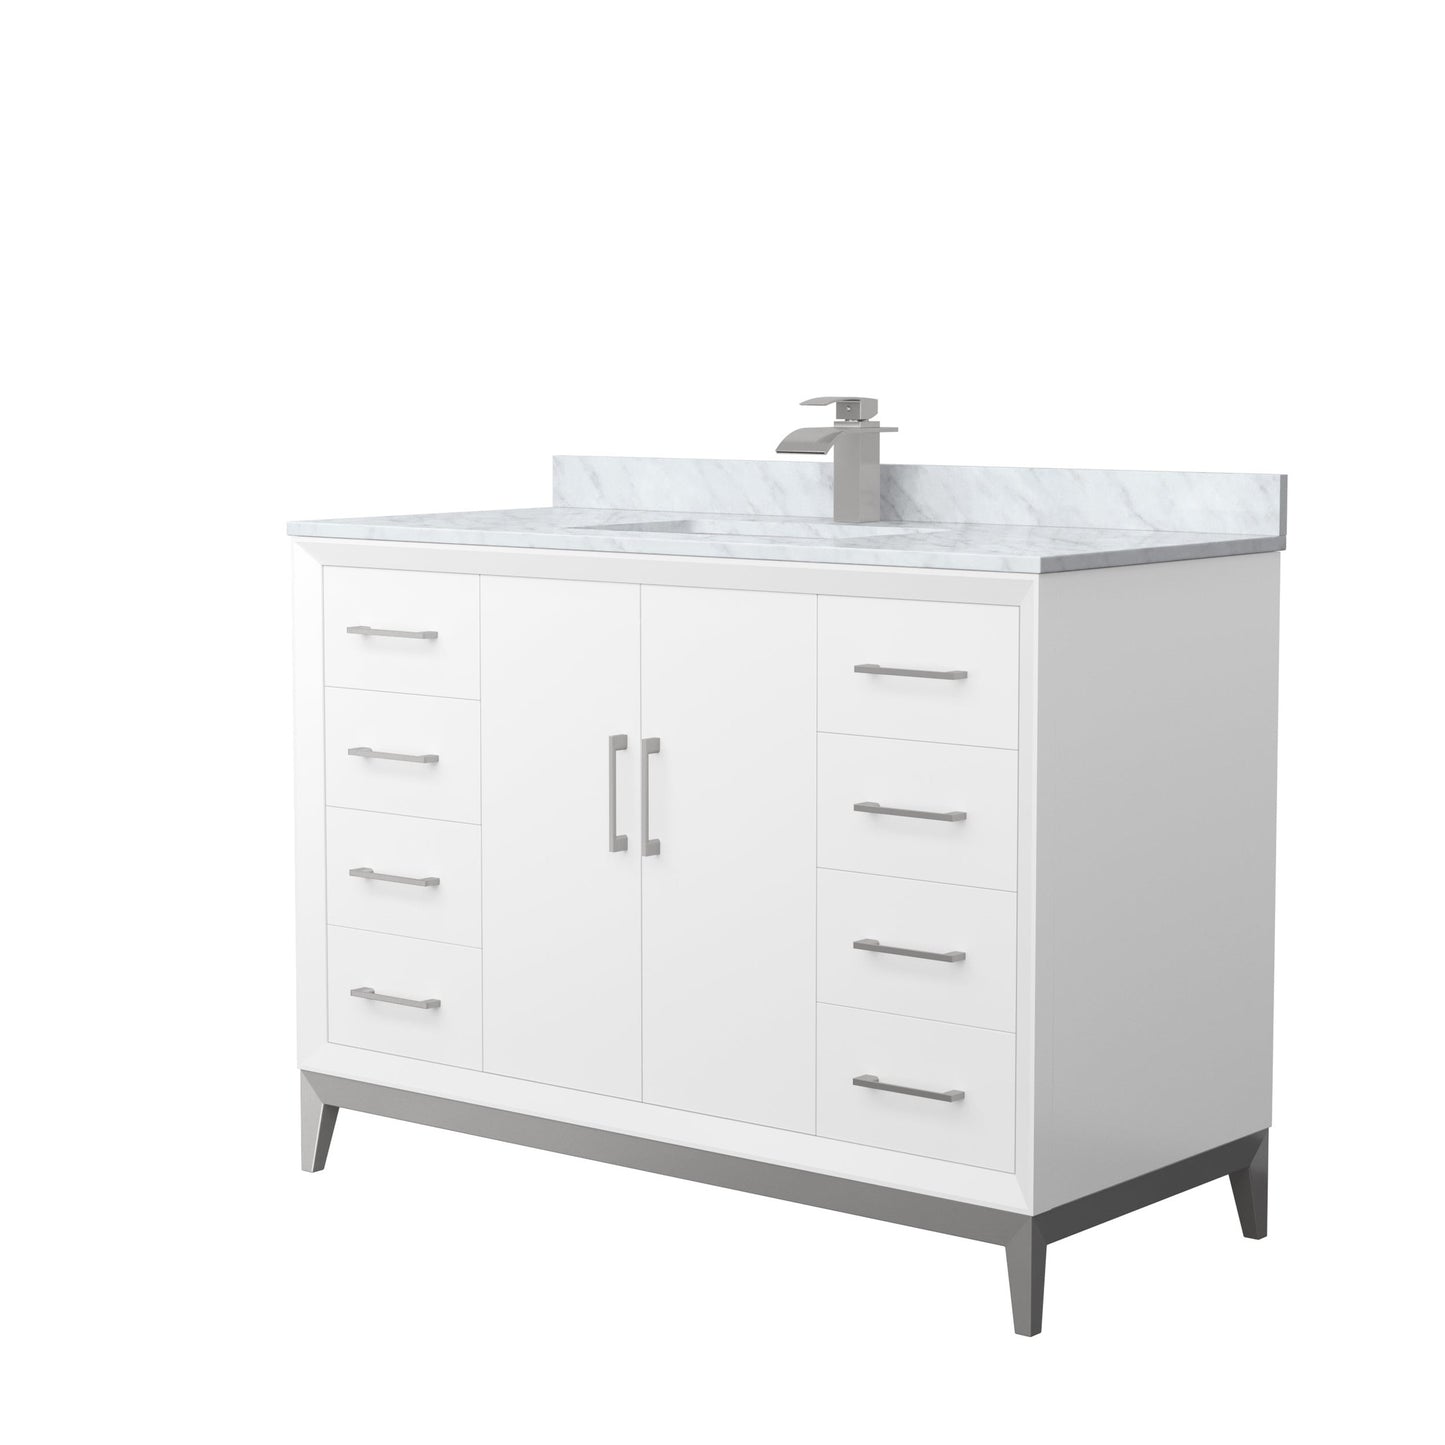 Wyndham Collection Amici 48" Single Bathroom Vanity in White, White Carrara Marble Countertop, Undermount Square Sink, Brushed Nickel Trim